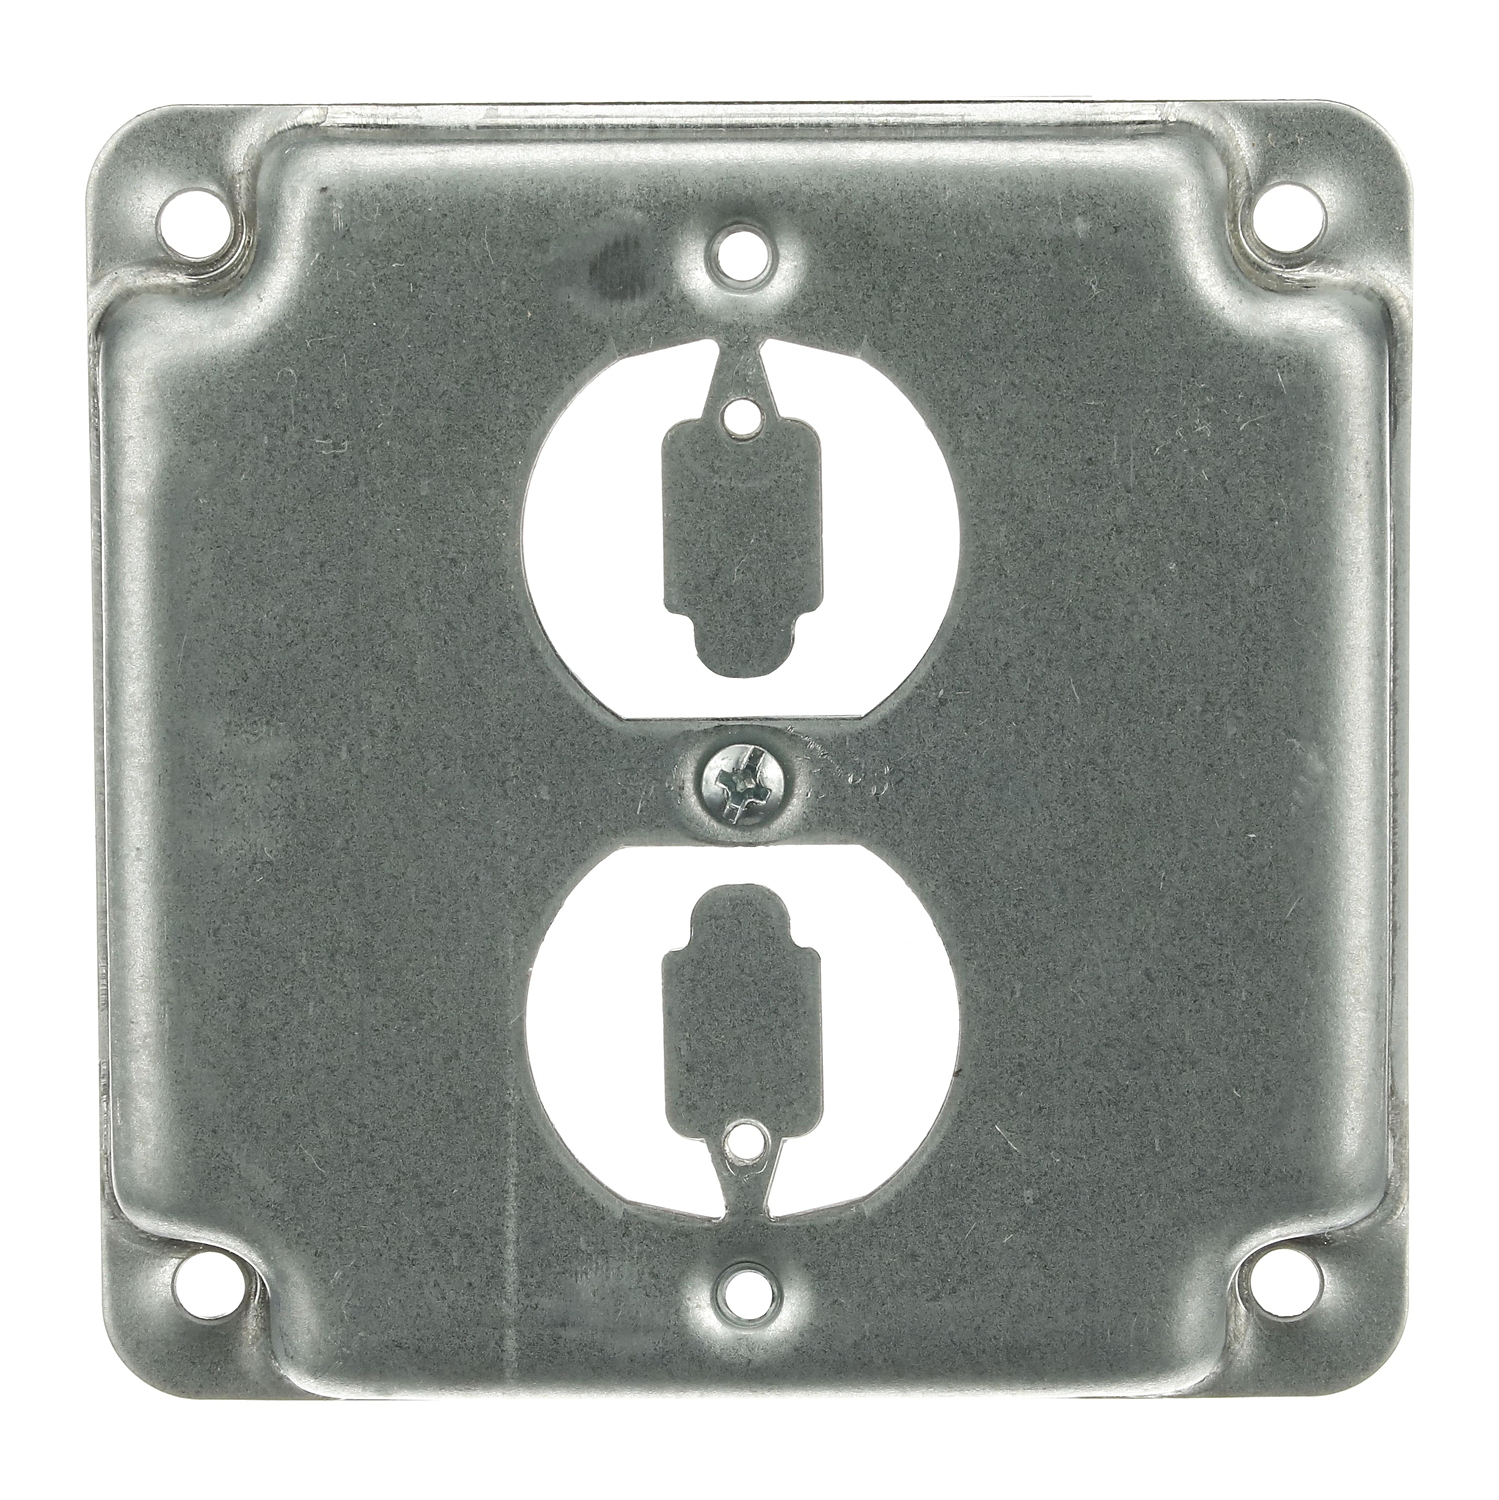 RS-12 Outlet Box Surface Cover Steel City;ABB - Installation Products